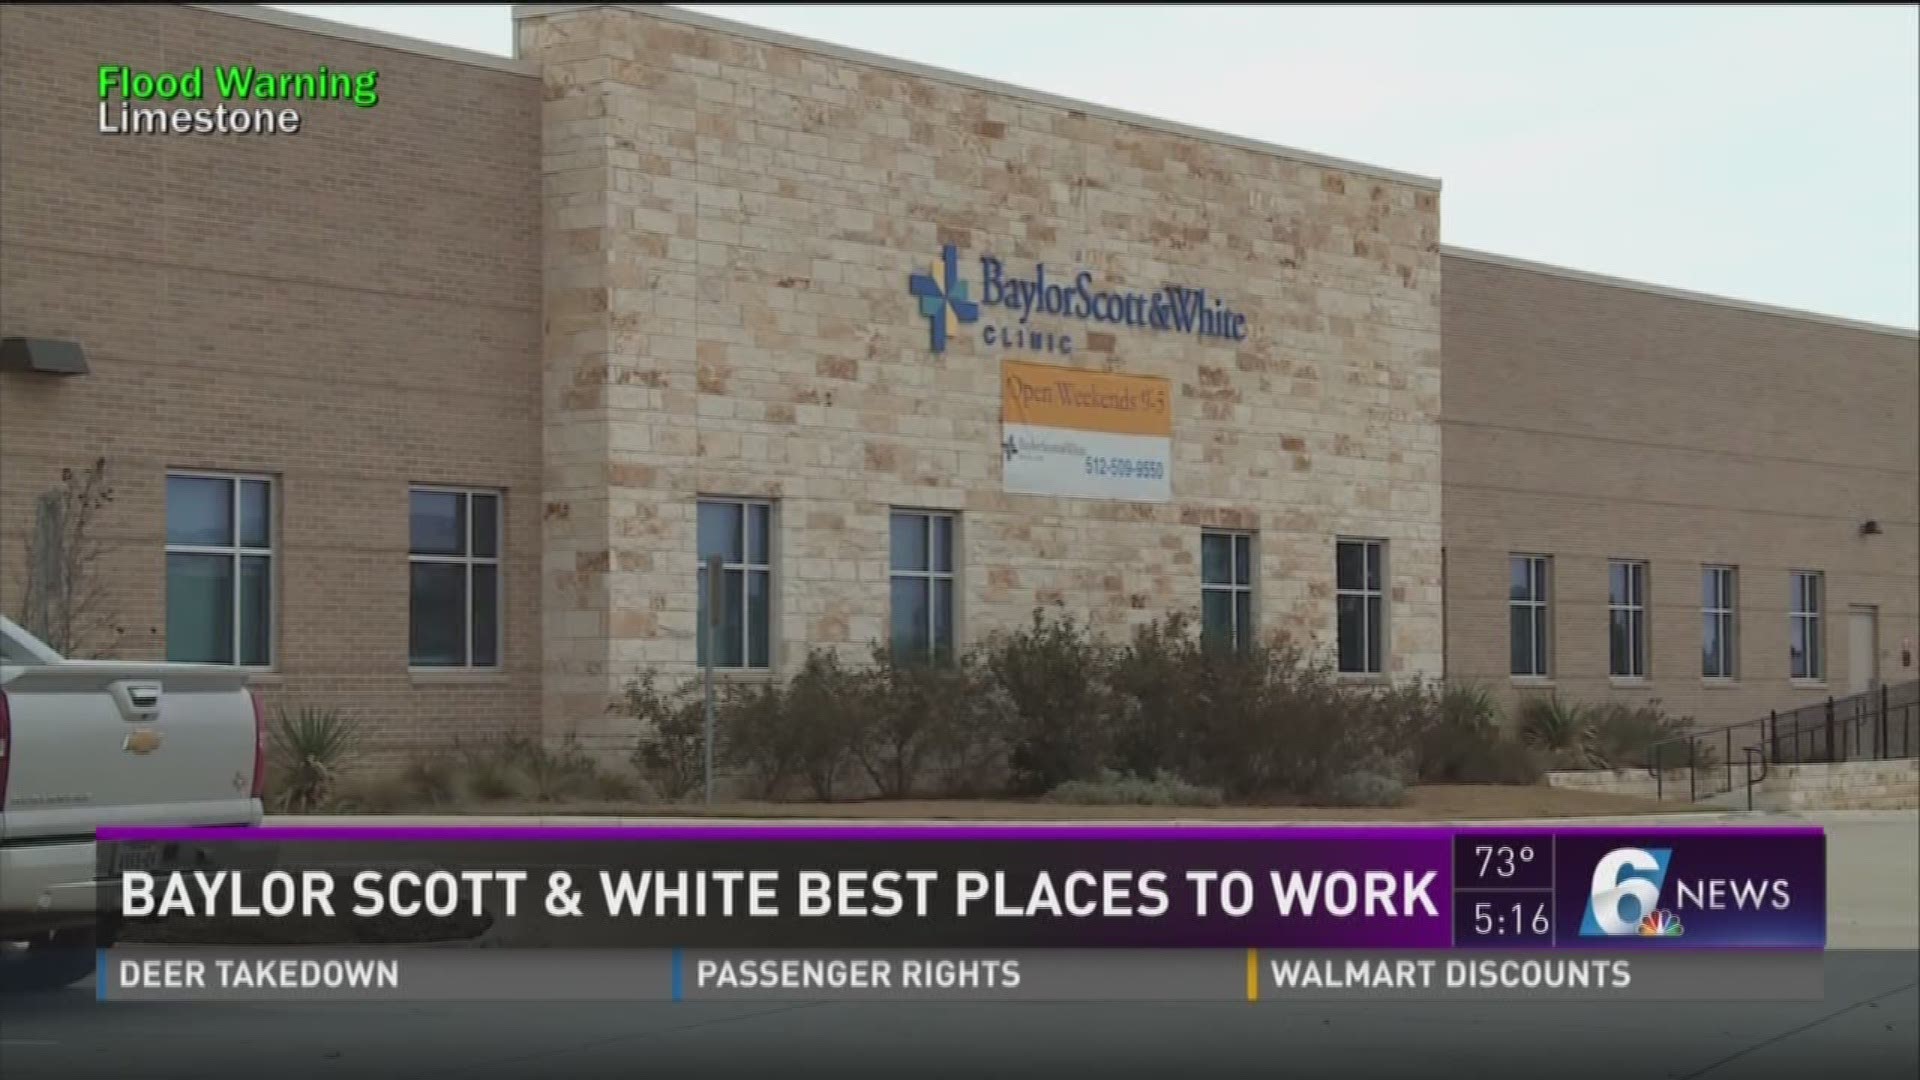 If you're in the medical field, Baylor Scott and White is one of the best places you can work. 